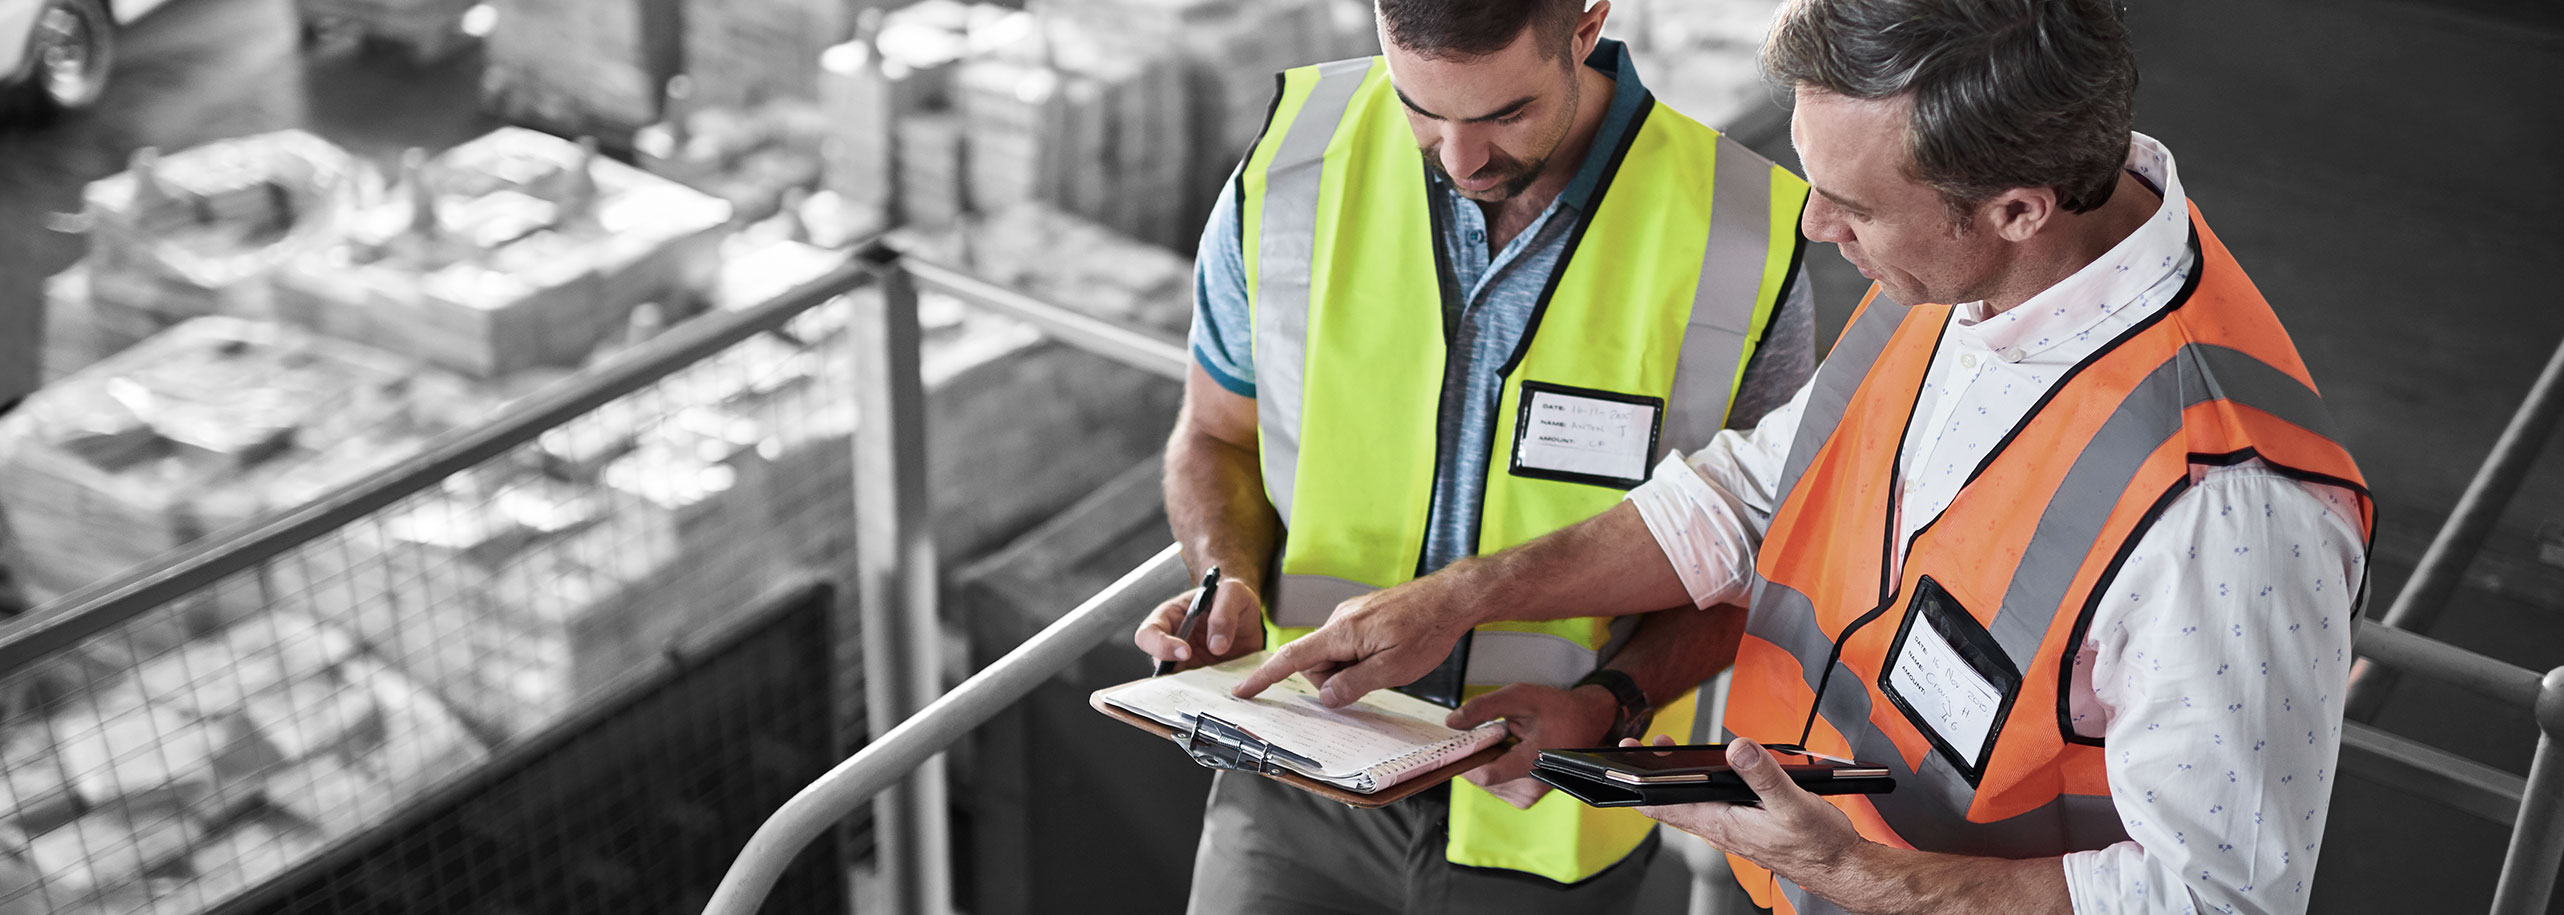 Professional employees wearing safety vests, looking at a clipboard together in a warehouse